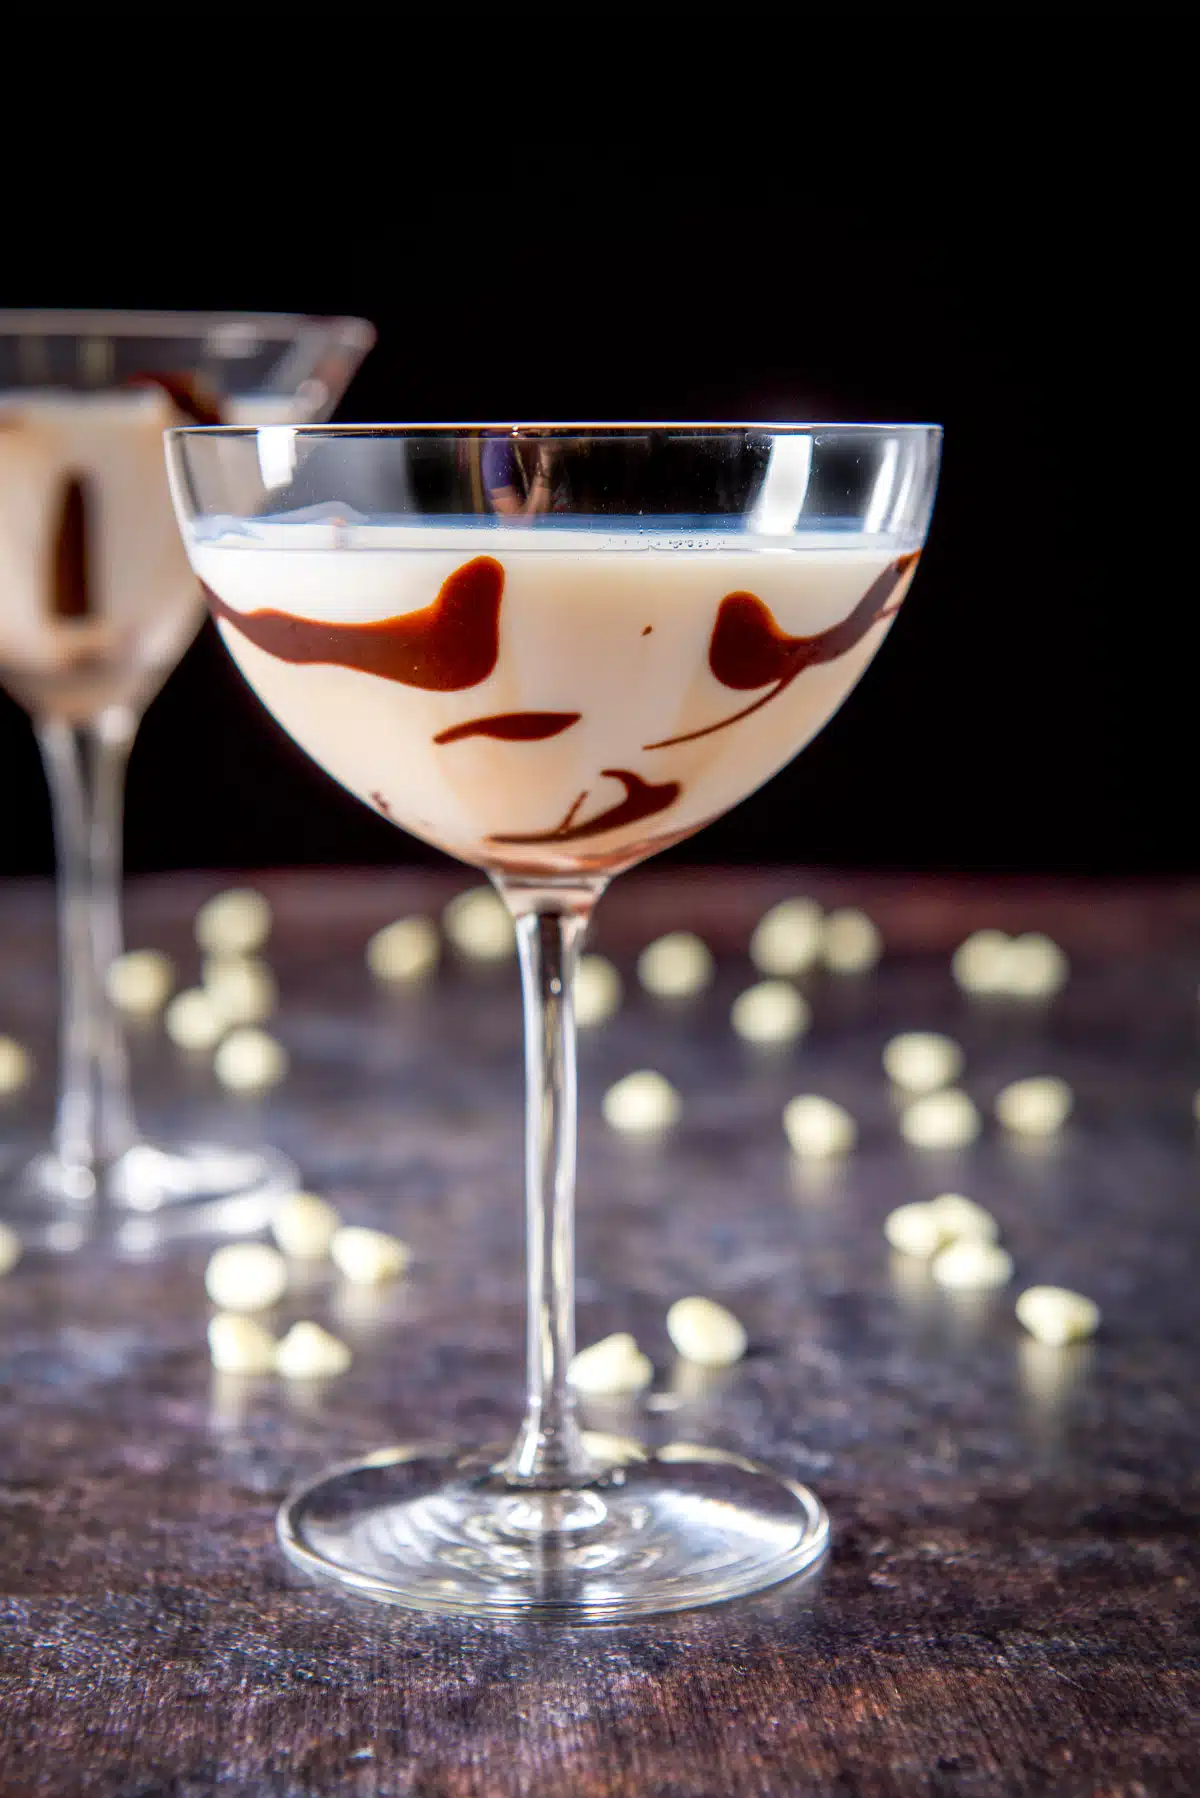 A bowl type of martini glass filled with the white chocolate martini with chocolate chips on the table along with another glass